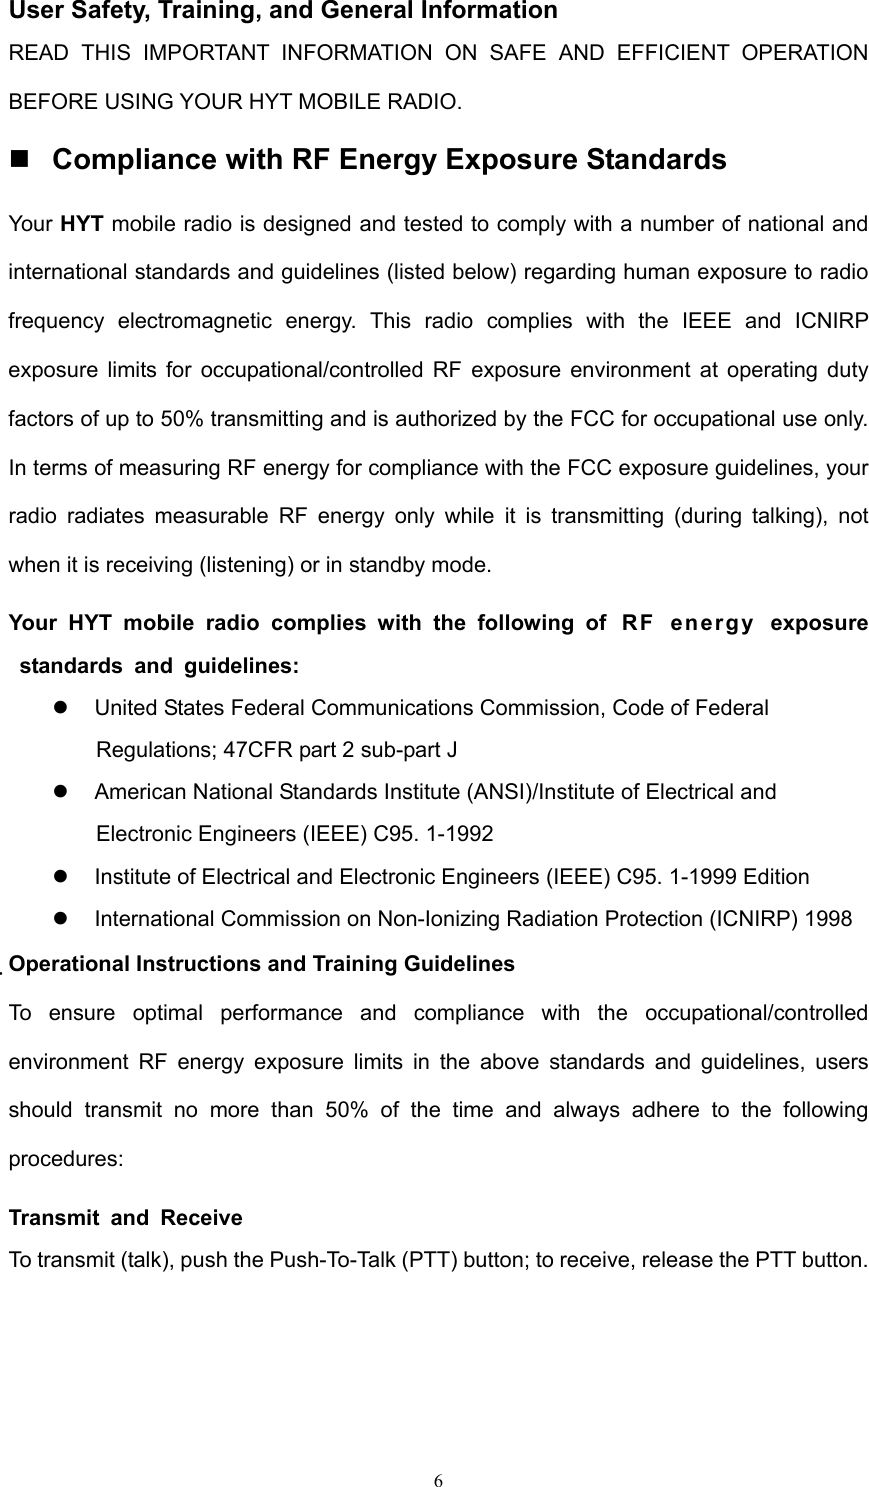  6 User Safety, Training, and General Information READ THIS IMPORTANT INFORMATION ON SAFE AND EFFICIENT OPERATION BEFORE USING YOUR HYT MOBILE RADIO.  Compliance with RF Energy Exposure Standards Your HYT mobile radio is designed and tested to comply with a number of national and international standards and guidelines (listed below) regarding human exposure to radio frequency electromagnetic energy. This radio complies with the IEEE and ICNIRP exposure limits for occupational/controlled RF exposure environment at operating duty factors of up to 50% transmitting and is authorized by the FCC for occupational use only. In terms of measuring RF energy for compliance with the FCC exposure guidelines, your radio radiates measurable RF energy only while it is transmitting (during talking), not when it is receiving (listening) or in standby mode. Your HYT mobile radio complies with the following of  RF  energy  exposure standards and guidelines:    United States Federal Communications Commission, Code of Federal Regulations; 47CFR part 2 sub-part J    American National Standards Institute (ANSI)/Institute of Electrical and Electronic Engineers (IEEE) C95. 1-1992    Institute of Electrical and Electronic Engineers (IEEE) C95. 1-1999 Edition    International Commission on Non-Ionizing Radiation Protection (ICNIRP) 1998 Operational Instructions and Training Guidelines To ensure optimal performance and compliance with the occupational/controlled environment RF energy exposure limits in the above standards and guidelines, users should transmit no more than 50% of the time and always adhere to the following procedures: Transmit and Receive To transmit (talk), push the Push-To-Talk (PTT) button; to receive, release the PTT button.   